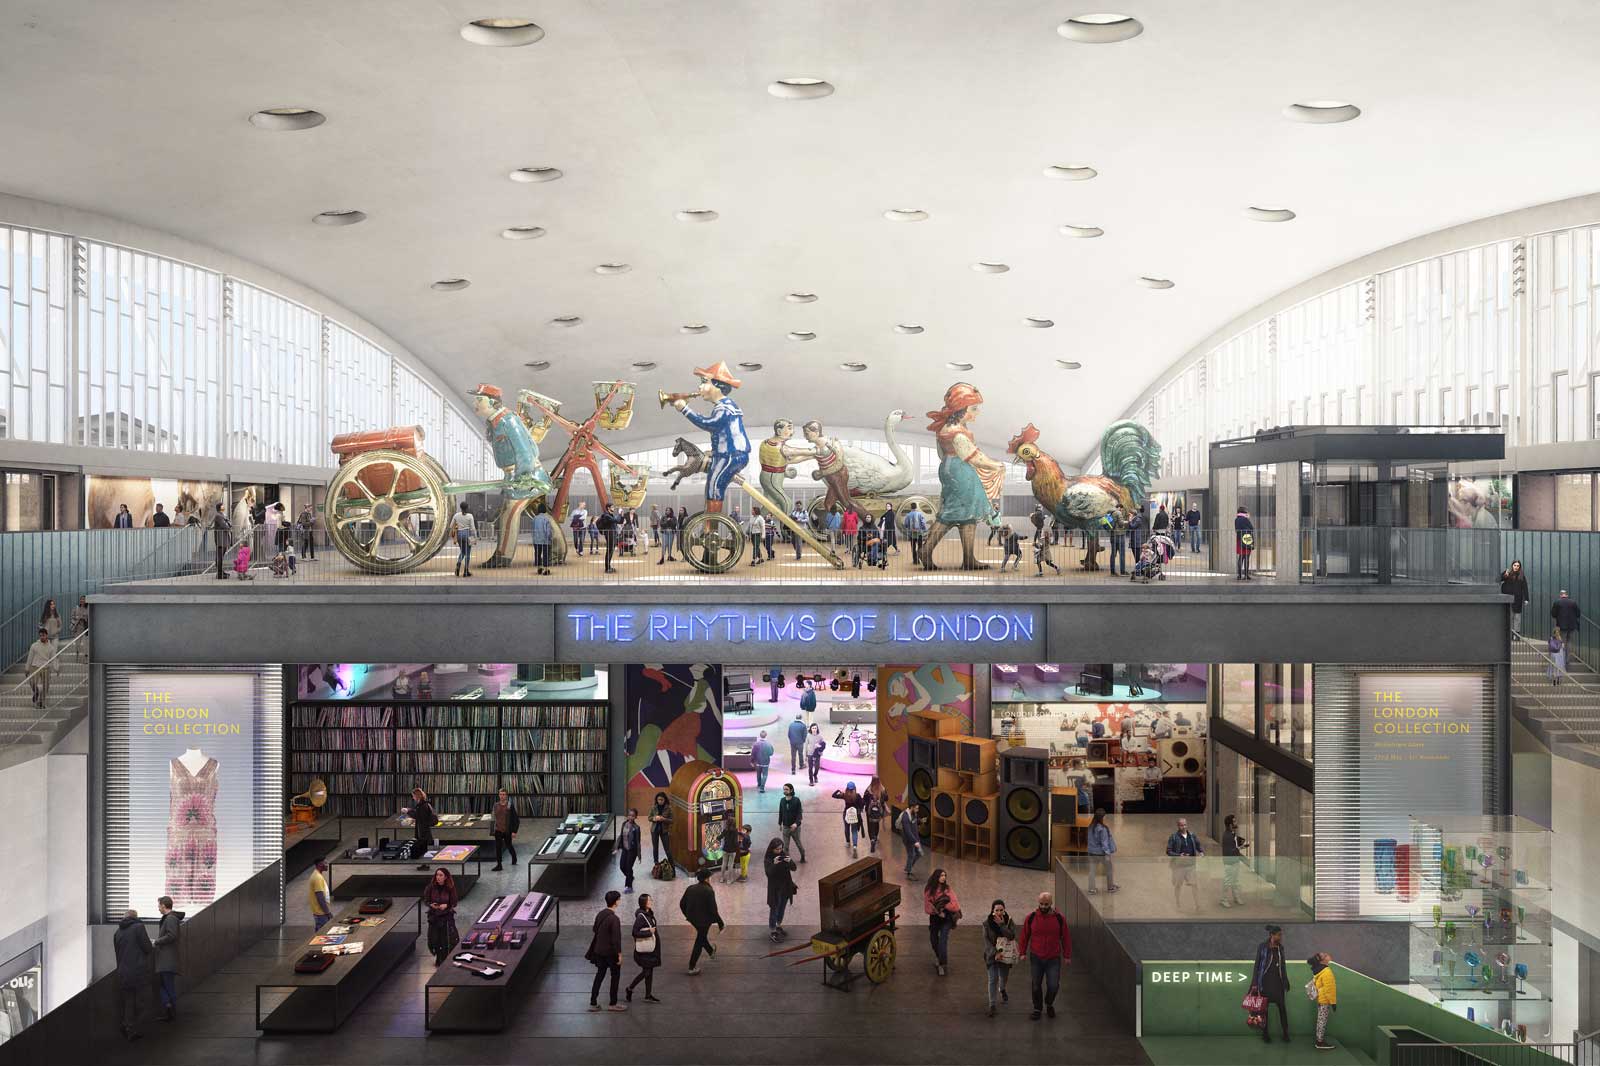 Artist's impression of the new Museum of London building in the Poultry Market.